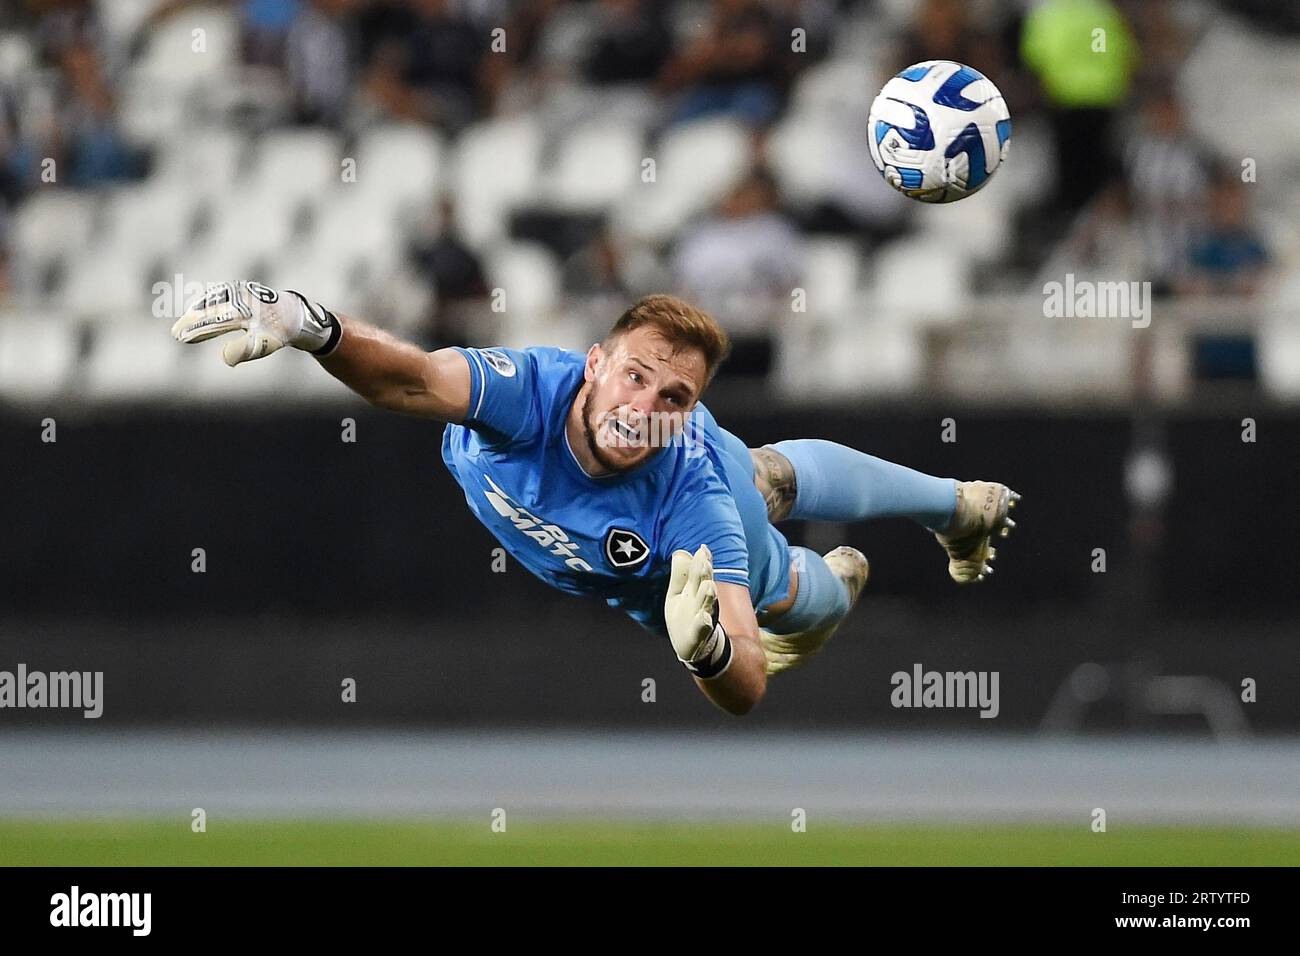 Rio de Janeiro, July 25, 2023. Soccer goalkeeper Lucas Perri of the Botafogo team, during the game for the South American Cup at the Engenhão stadium. Stock Photo